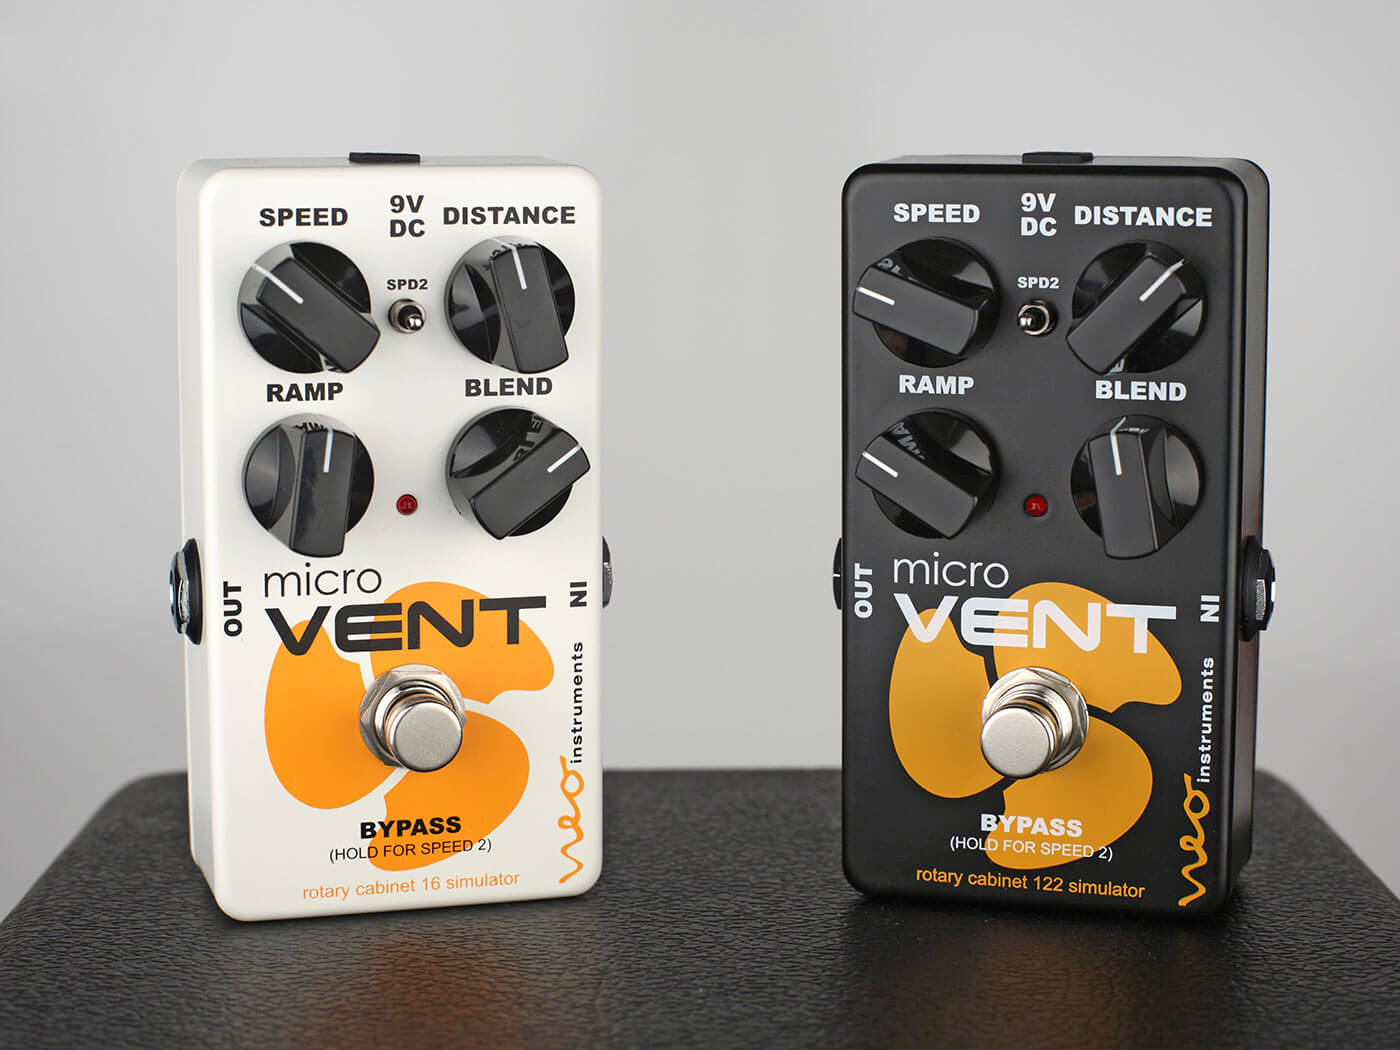 Neo Instruments' two Micro VENTs